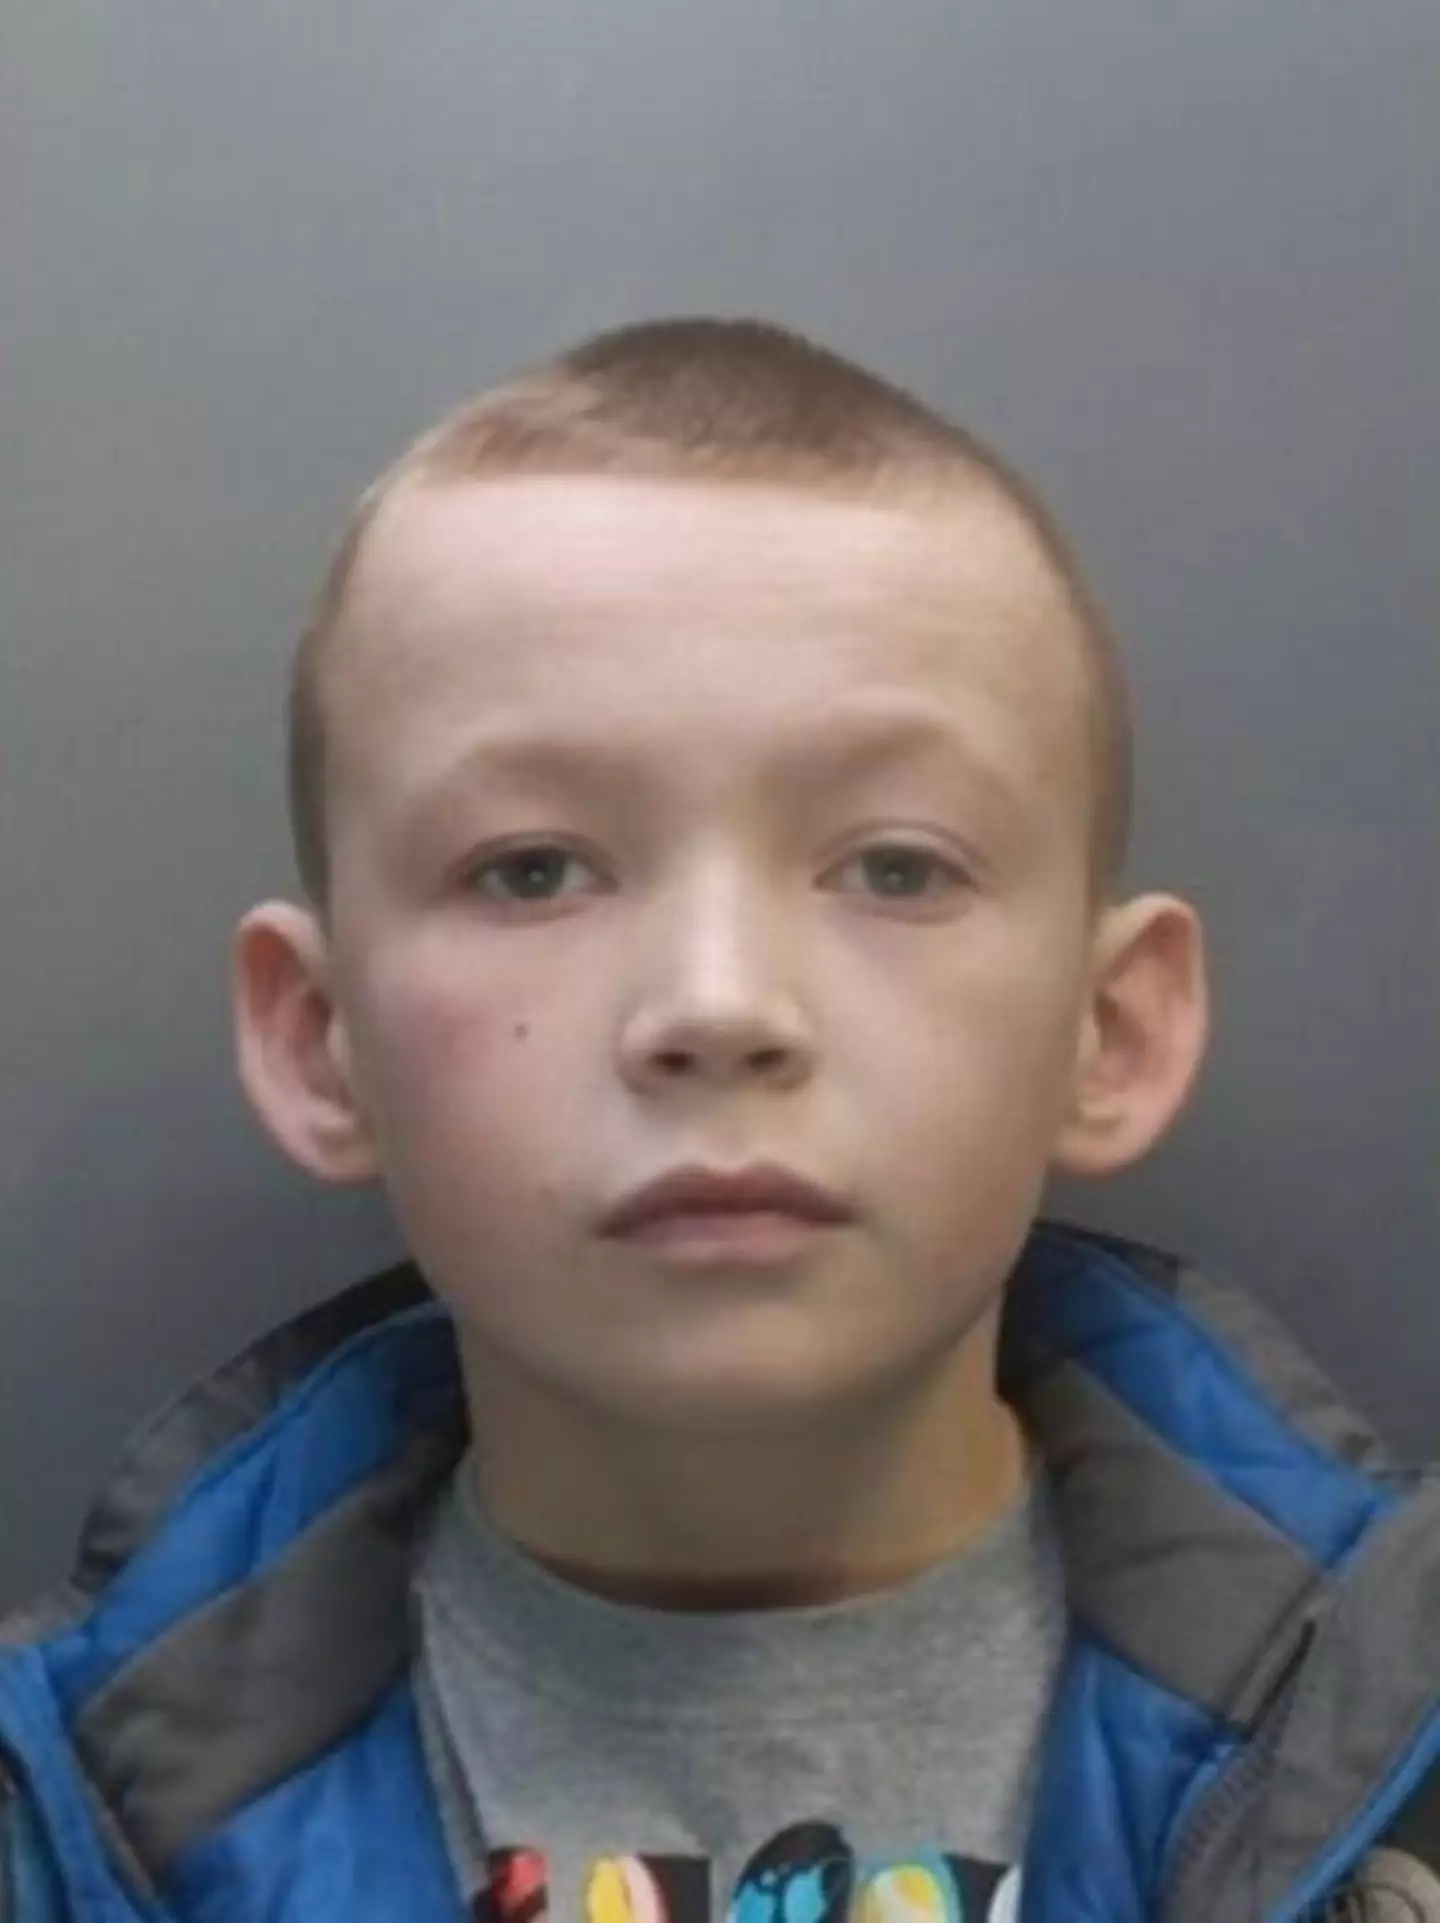 Alfie Hodgin received an Anti-Social Behaviour Order (ASBO) when he was just age 10.